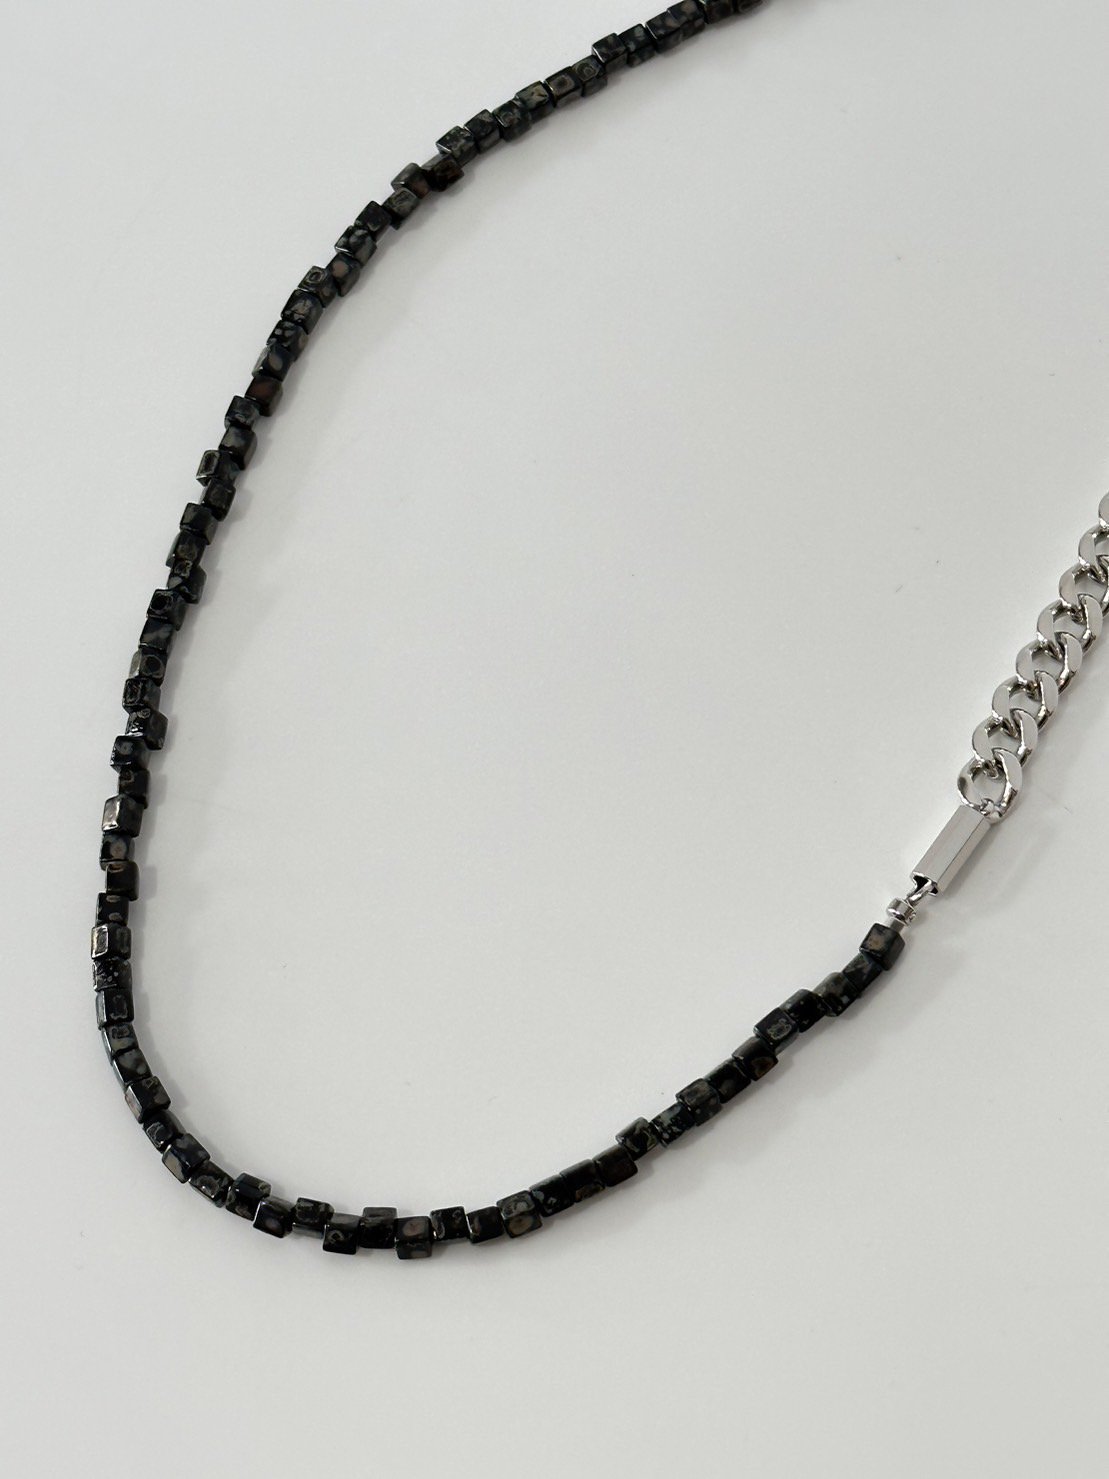 JieDa<br />SWITCHING BEADS NECKLACE / BLACK <img class='new_mark_img2' src='https://img.shop-pro.jp/img/new/icons14.gif' style='border:none;display:inline;margin:0px;padding:0px;width:auto;' />